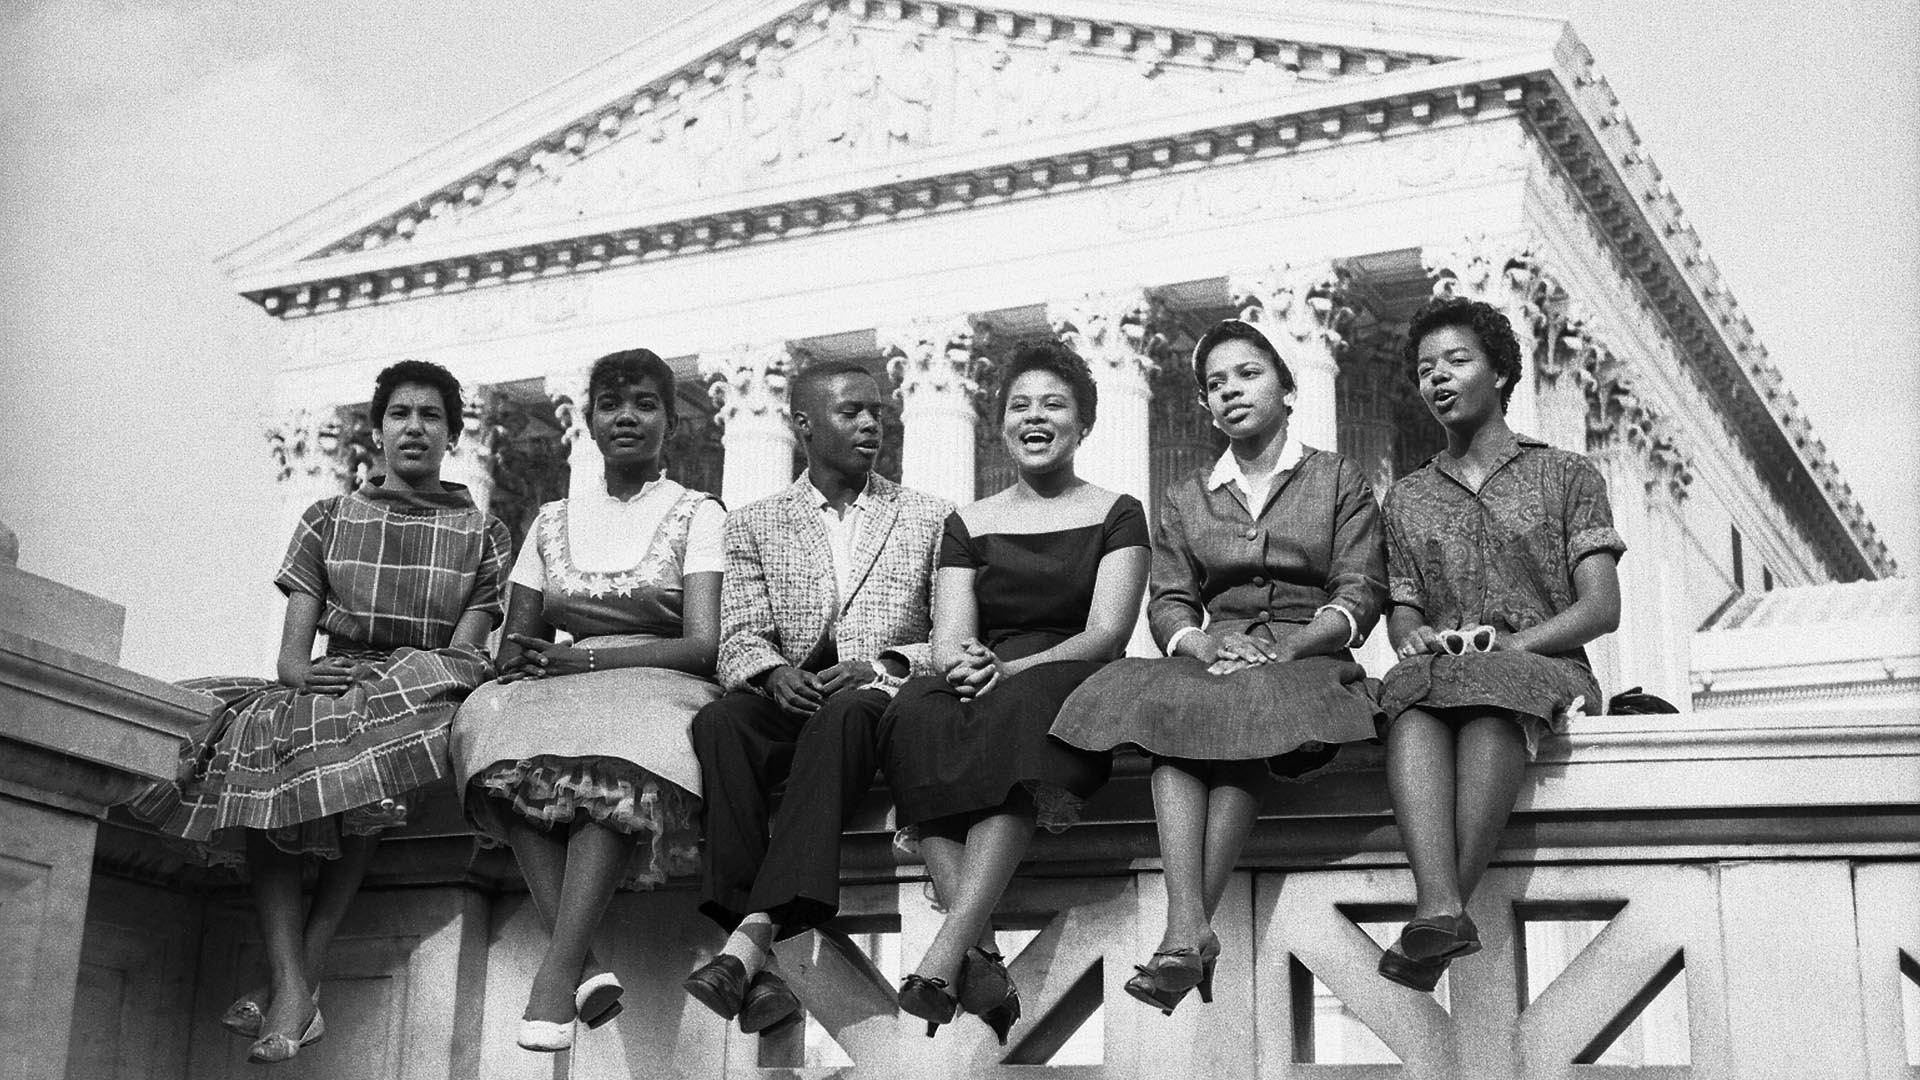 Six Black children who attended Little Rock's Central High School sit outside the Supreme Court in this 1958 photo. From left to right: Carlotta Walls, 15, Melva Patillo, 16, Jefferson Thomas, 15, Minnie Jean Brown, 16, Gloria Ray, 15, and Elizabeth Edkford, 16. Photo: Getty Images